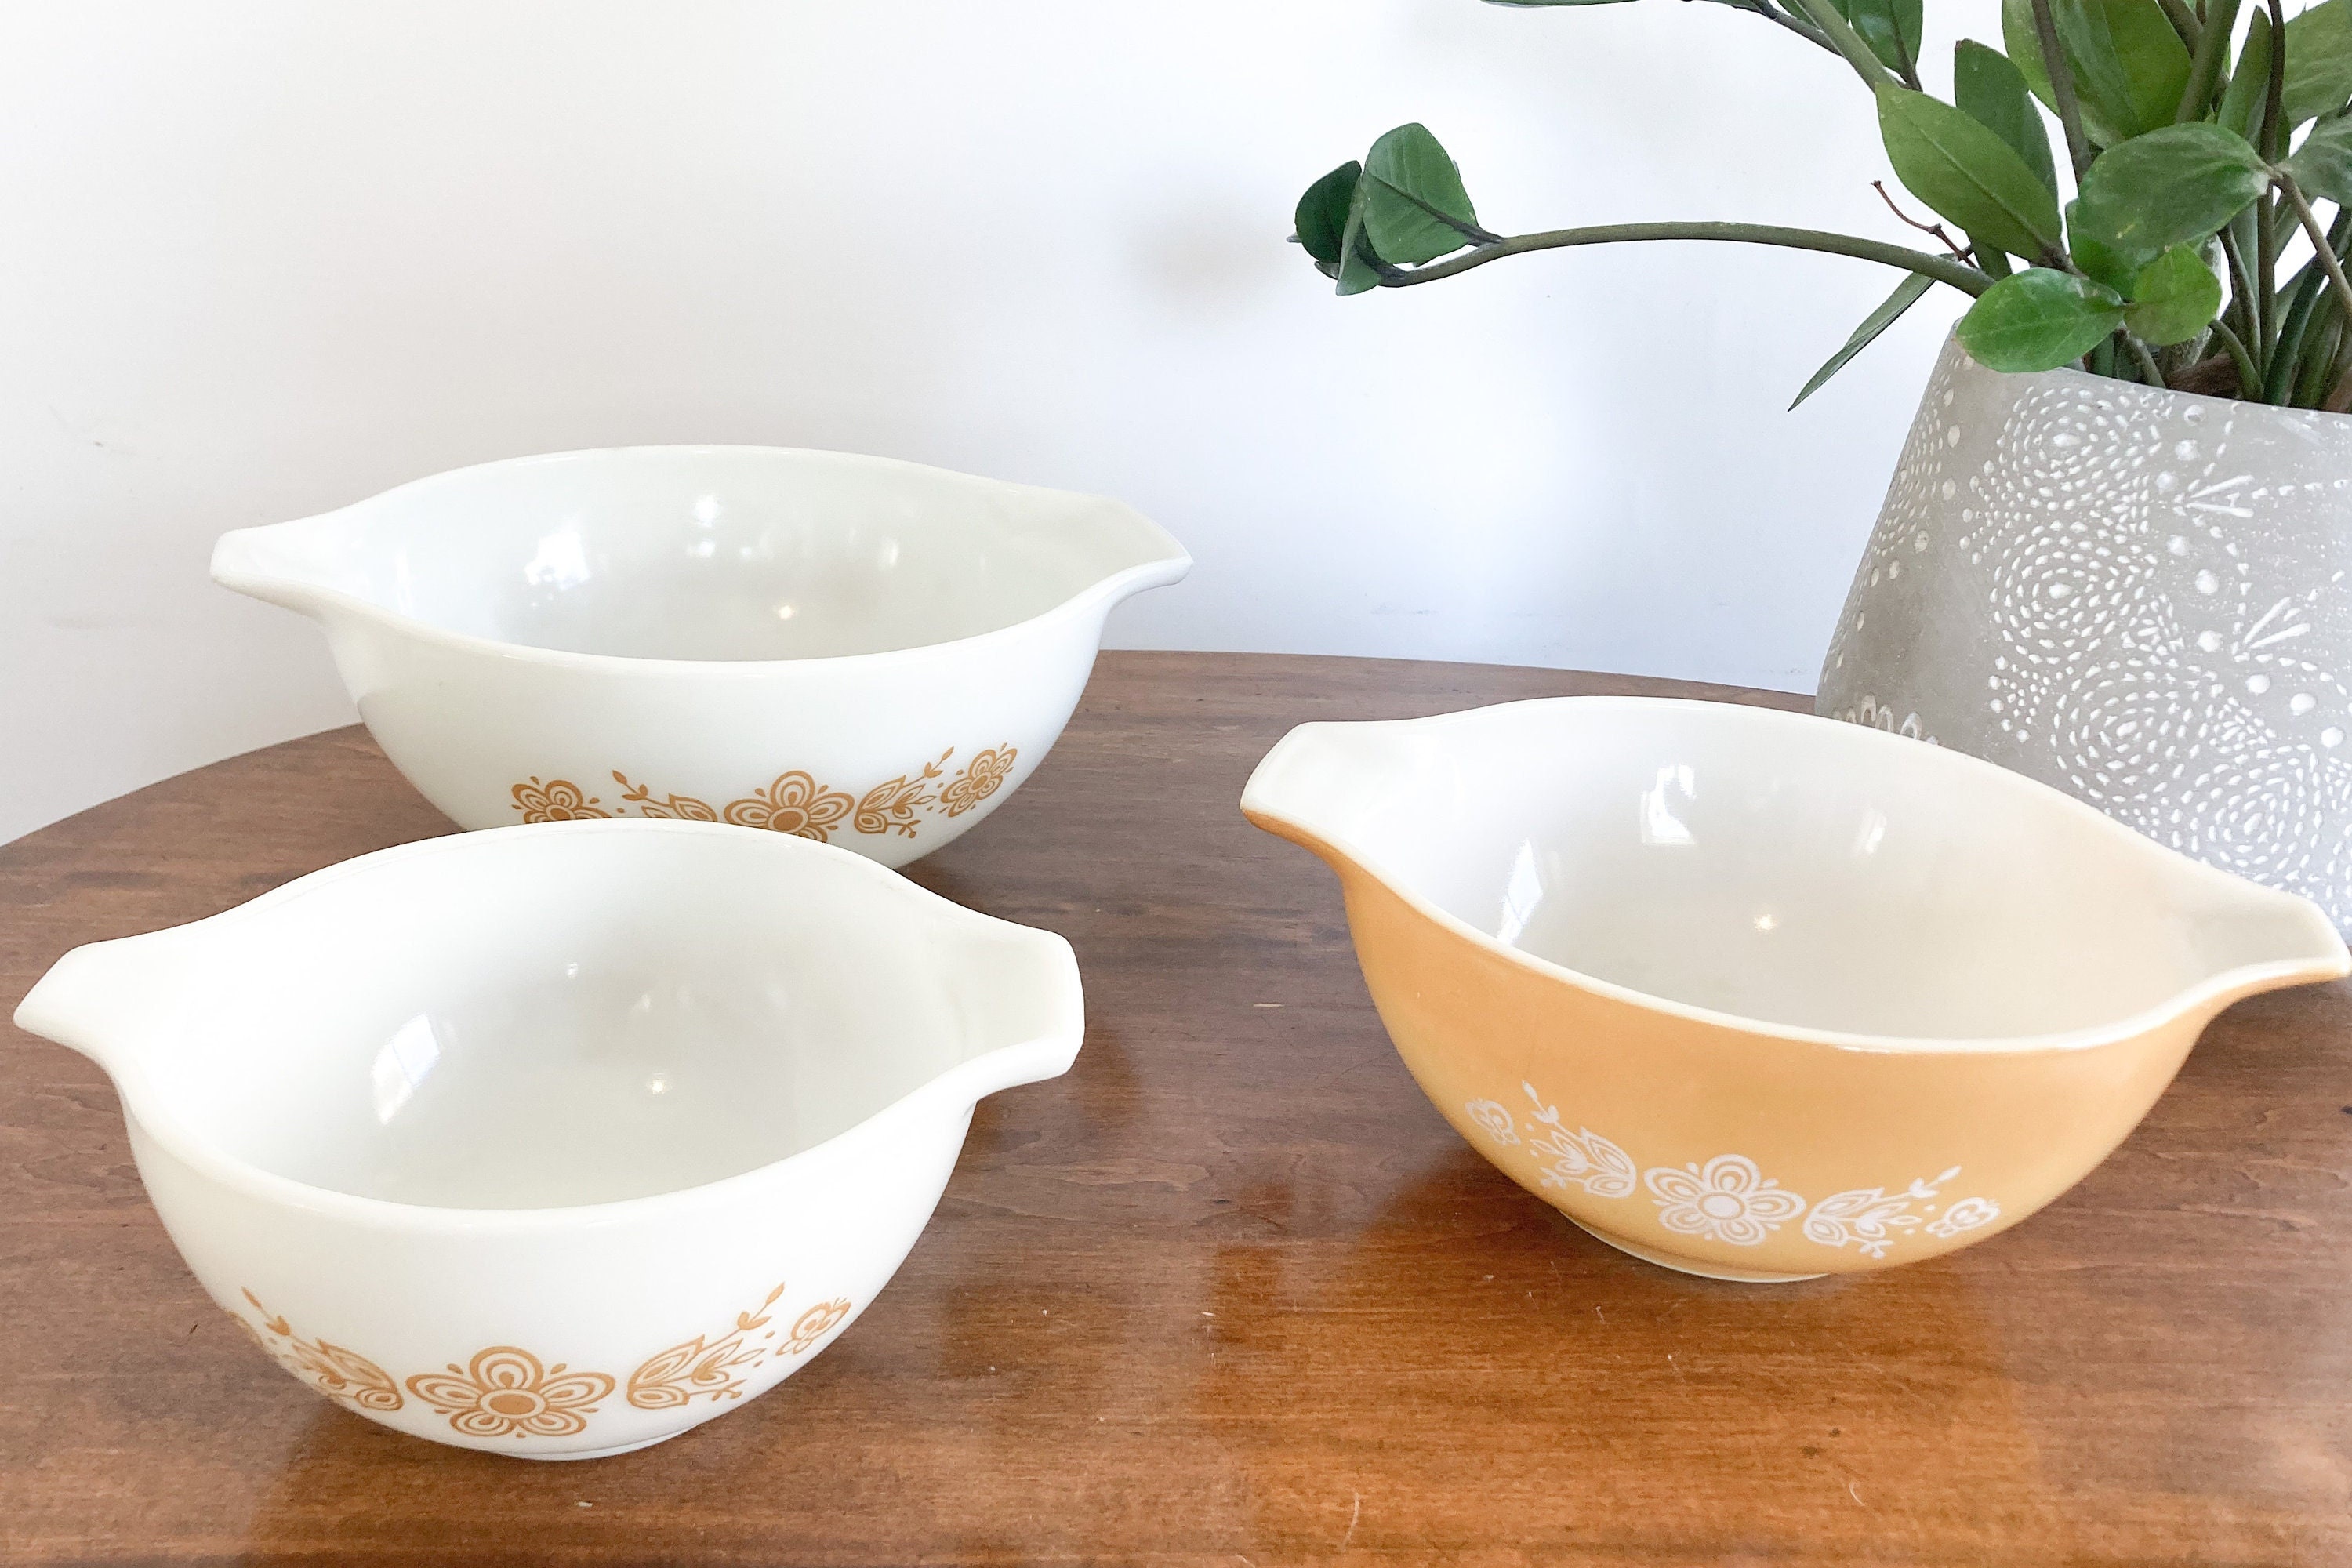 Vintage Pottery Tabletops Gallery Floral Dots Nesting Bowls Set of Three  Hand Painted Dishwasher Safe Microwavable Mixing Bowl Set of 3 